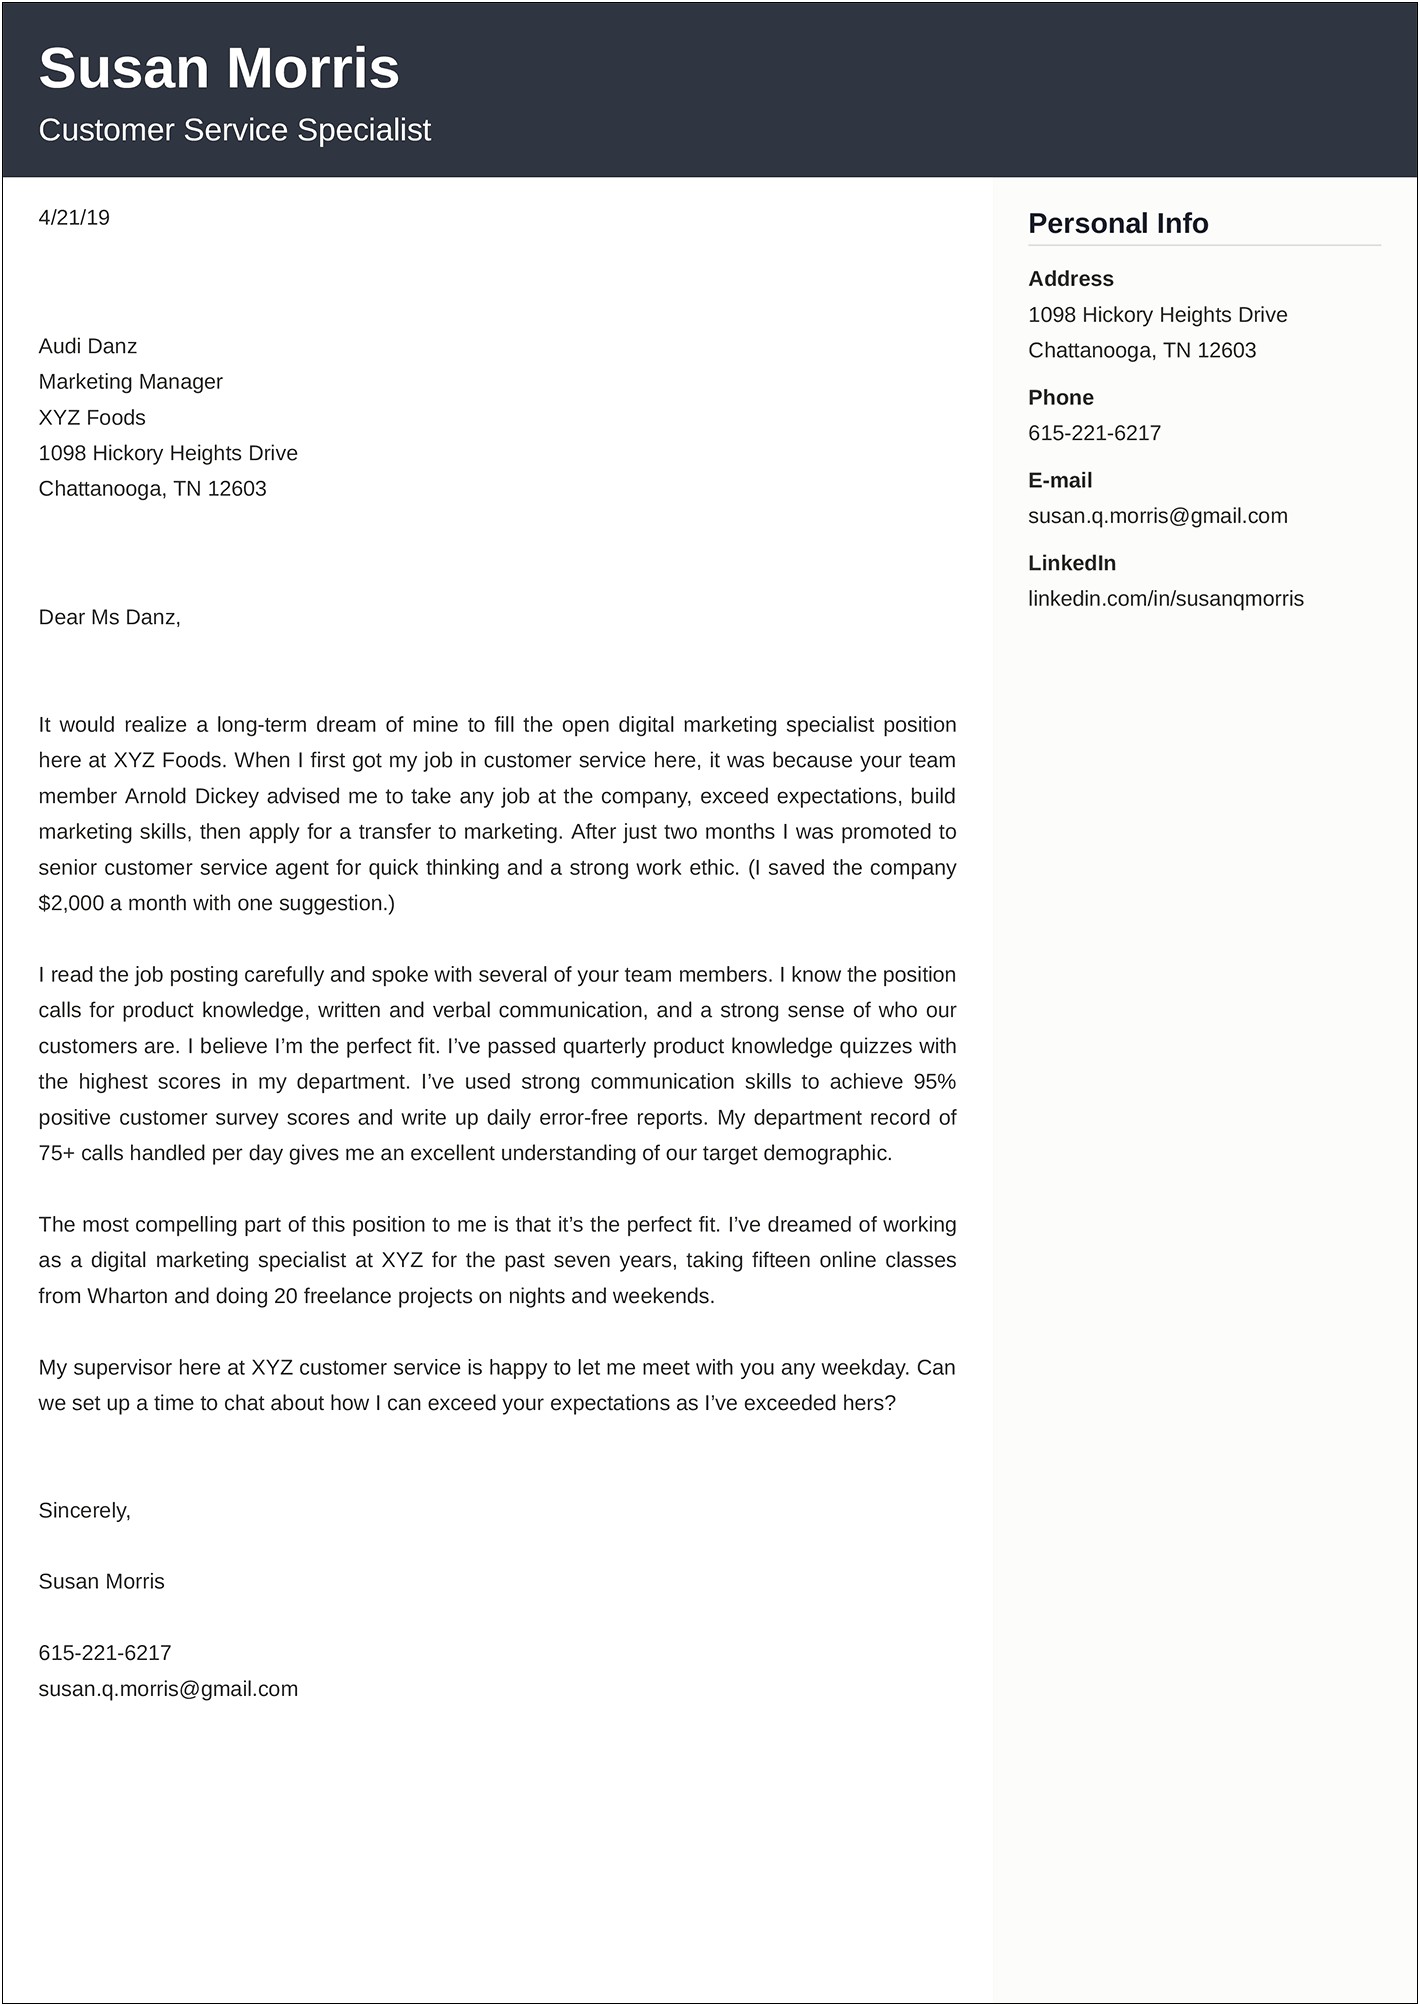 Example Cover Letter For Resume Healthcare